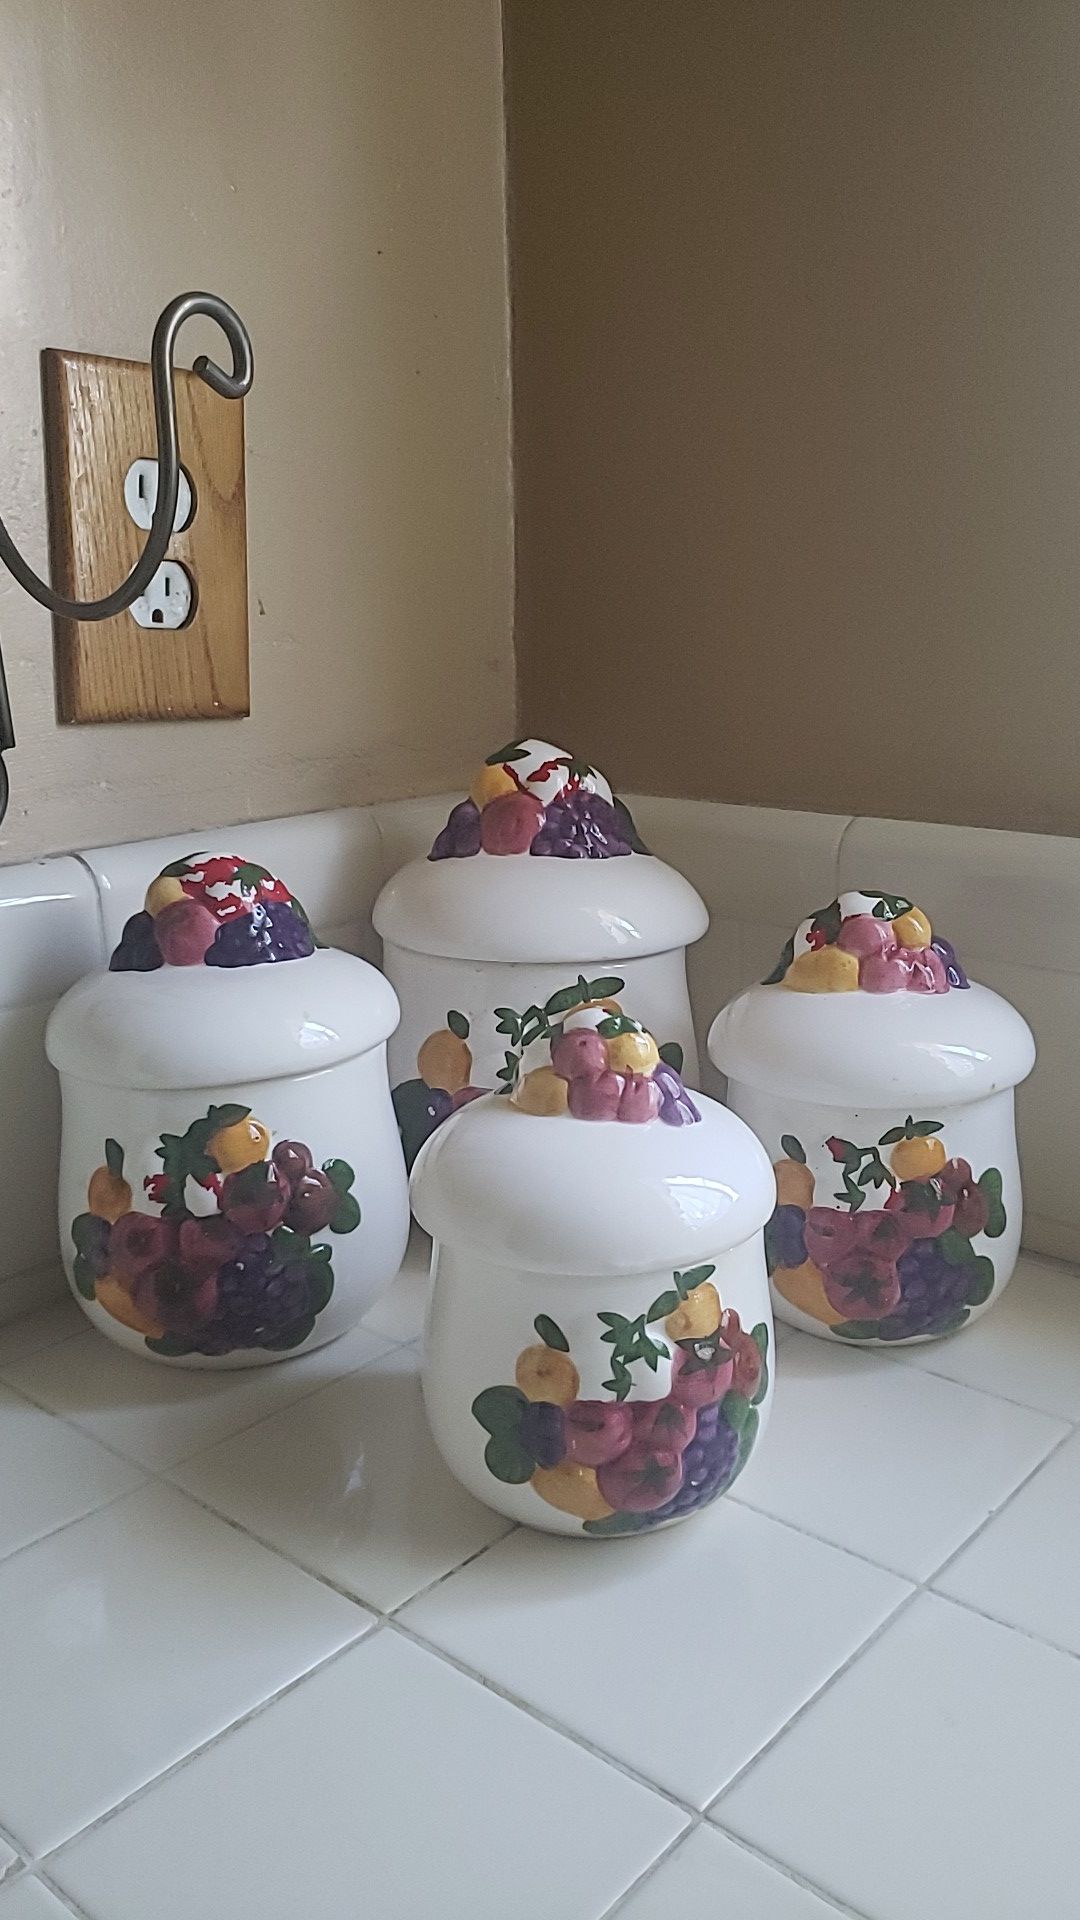 4 Kitchen Ceramic Canisters.